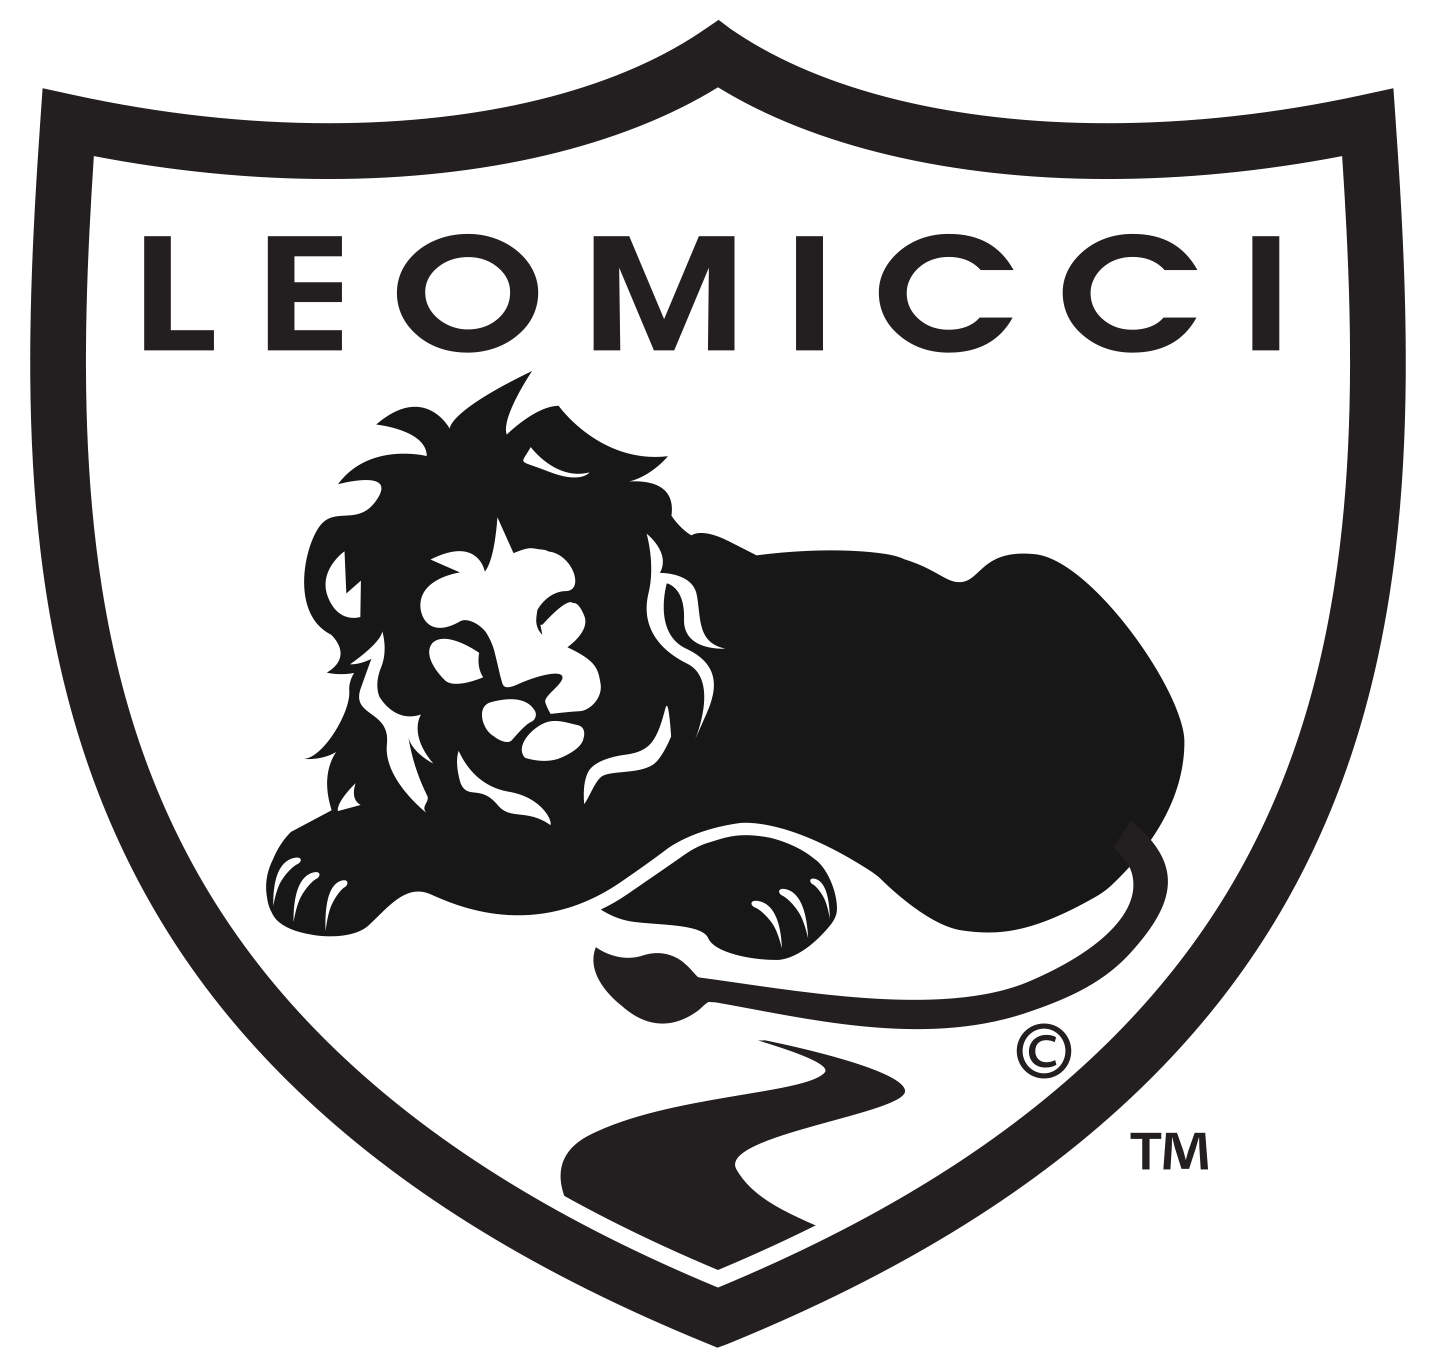 leomicci-official-david-nwaba-shop-mens-luxury-athletic-sports-clothing-apparel-muscle-compression-shirts-long-sleeve-black-white-grey-charcoal-store-logo.png